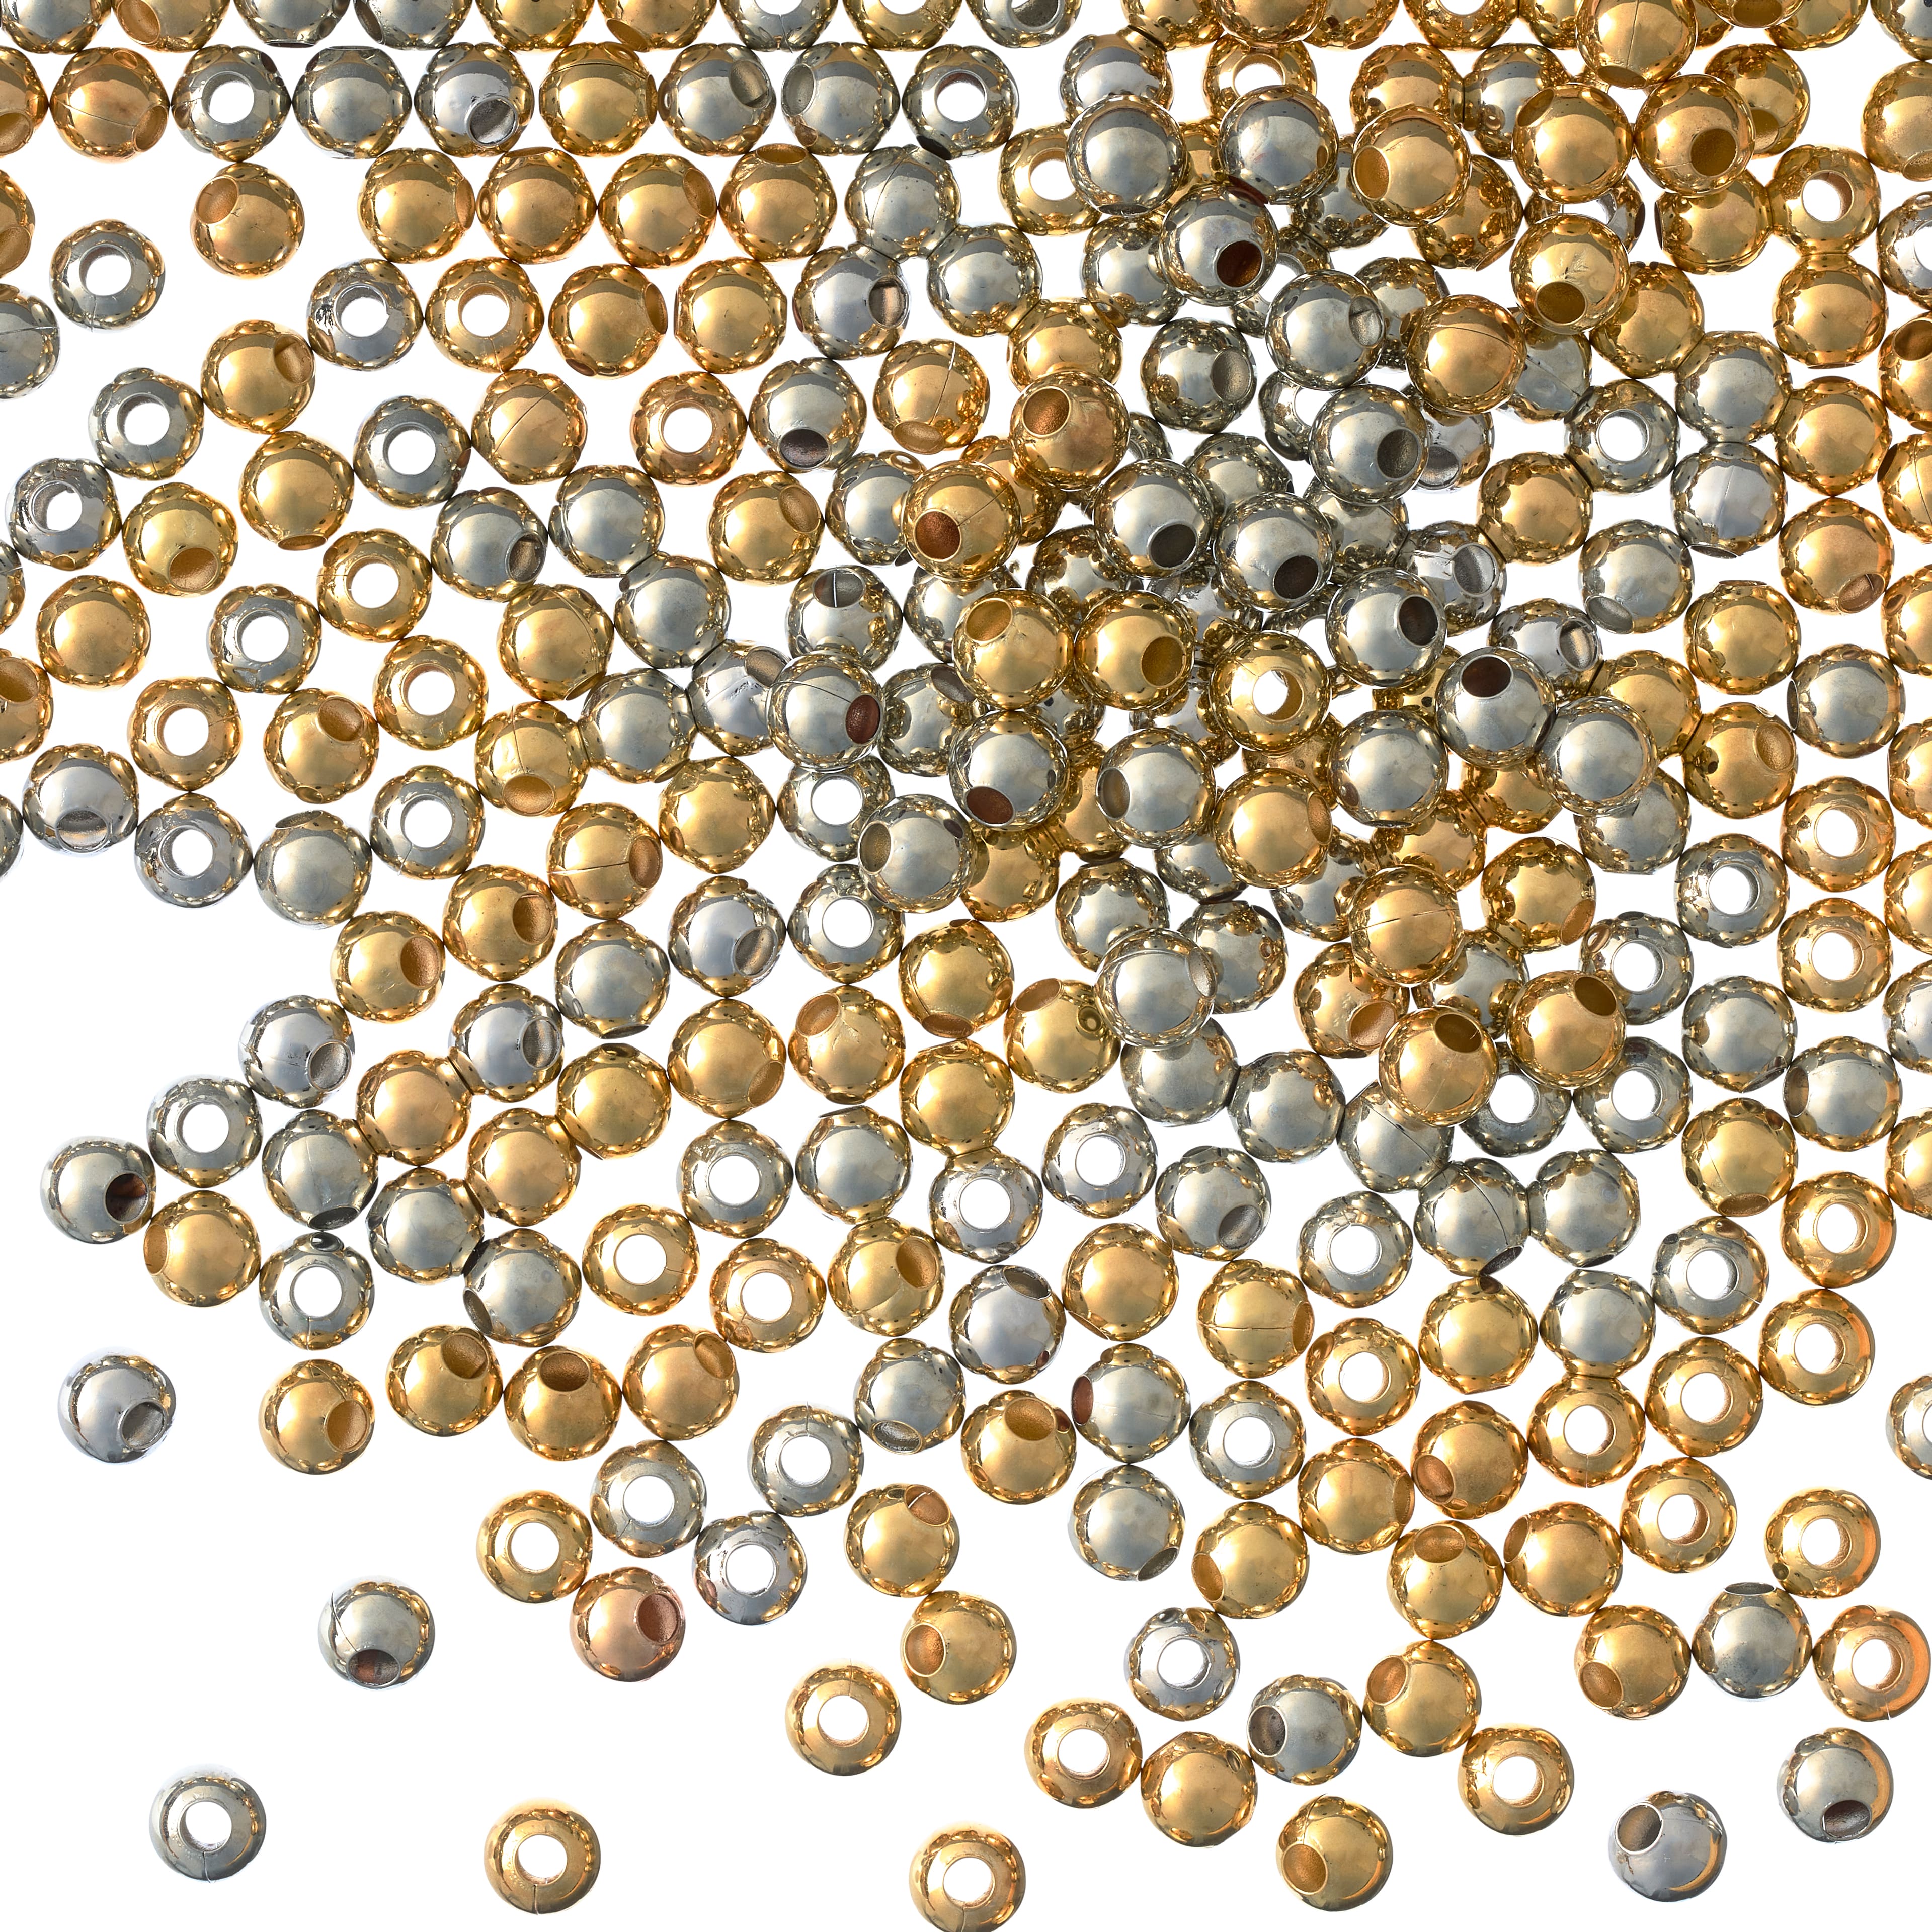 12 Packs: 300 ct. (3,600 total) Gold &#x26; Silver Craft Spacer Beads, 4mm by Bead Landing&#x2122;